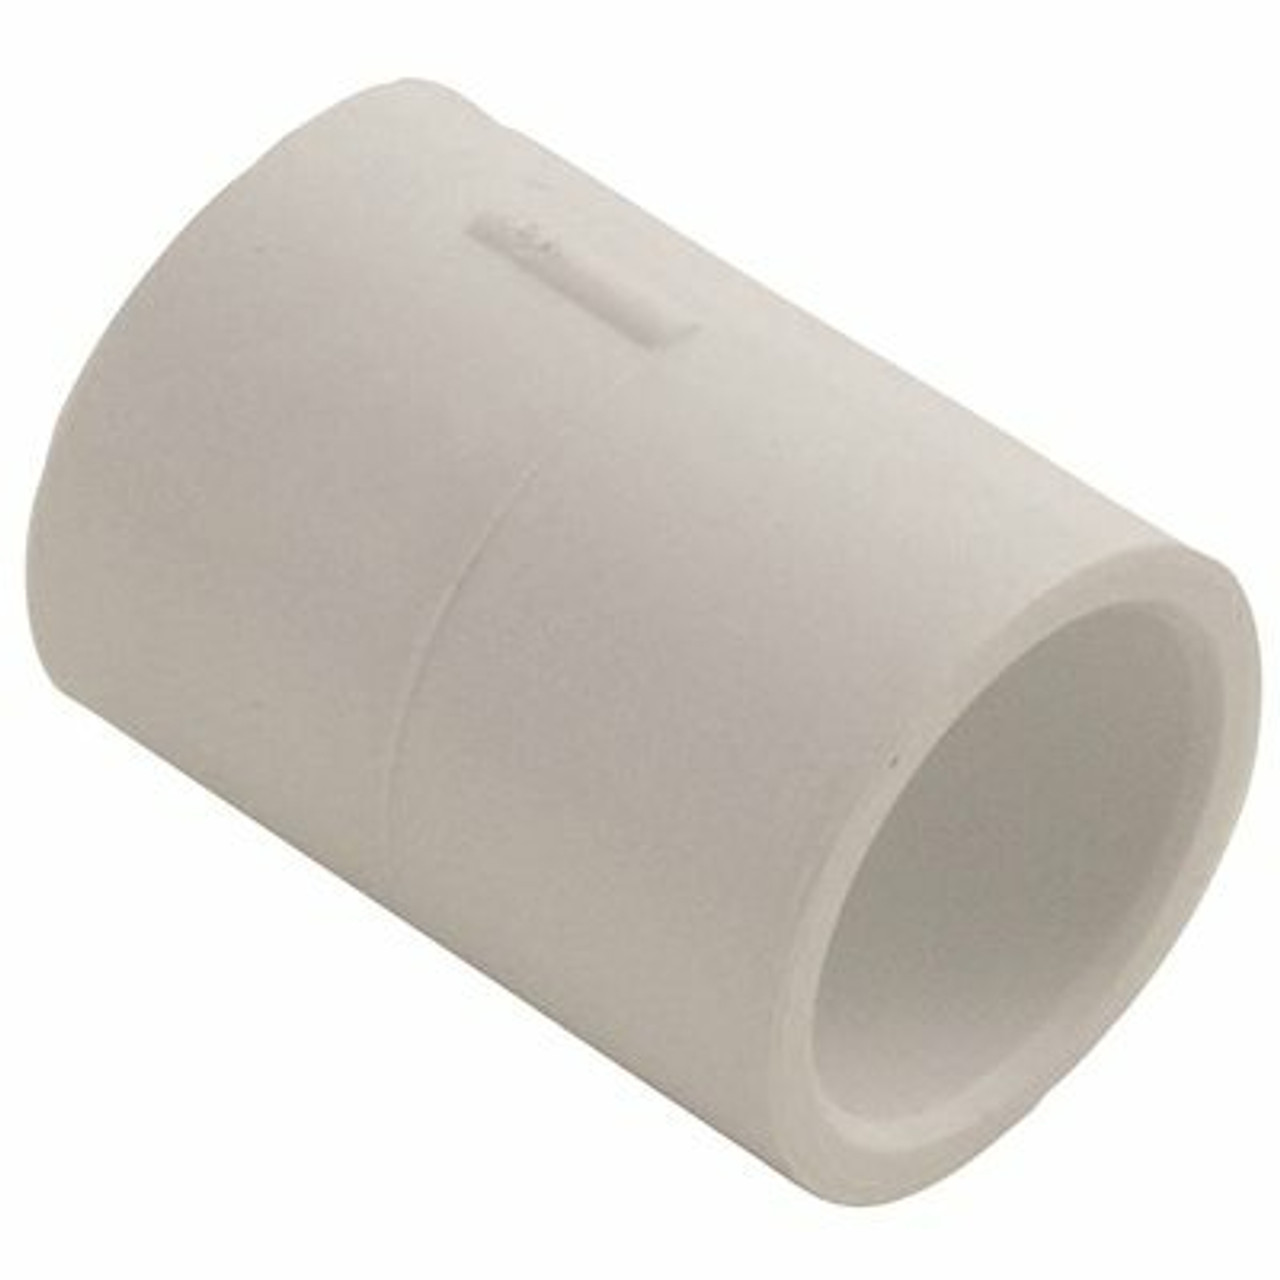 Proplus Pvc Female Adapter, 3/4 In.